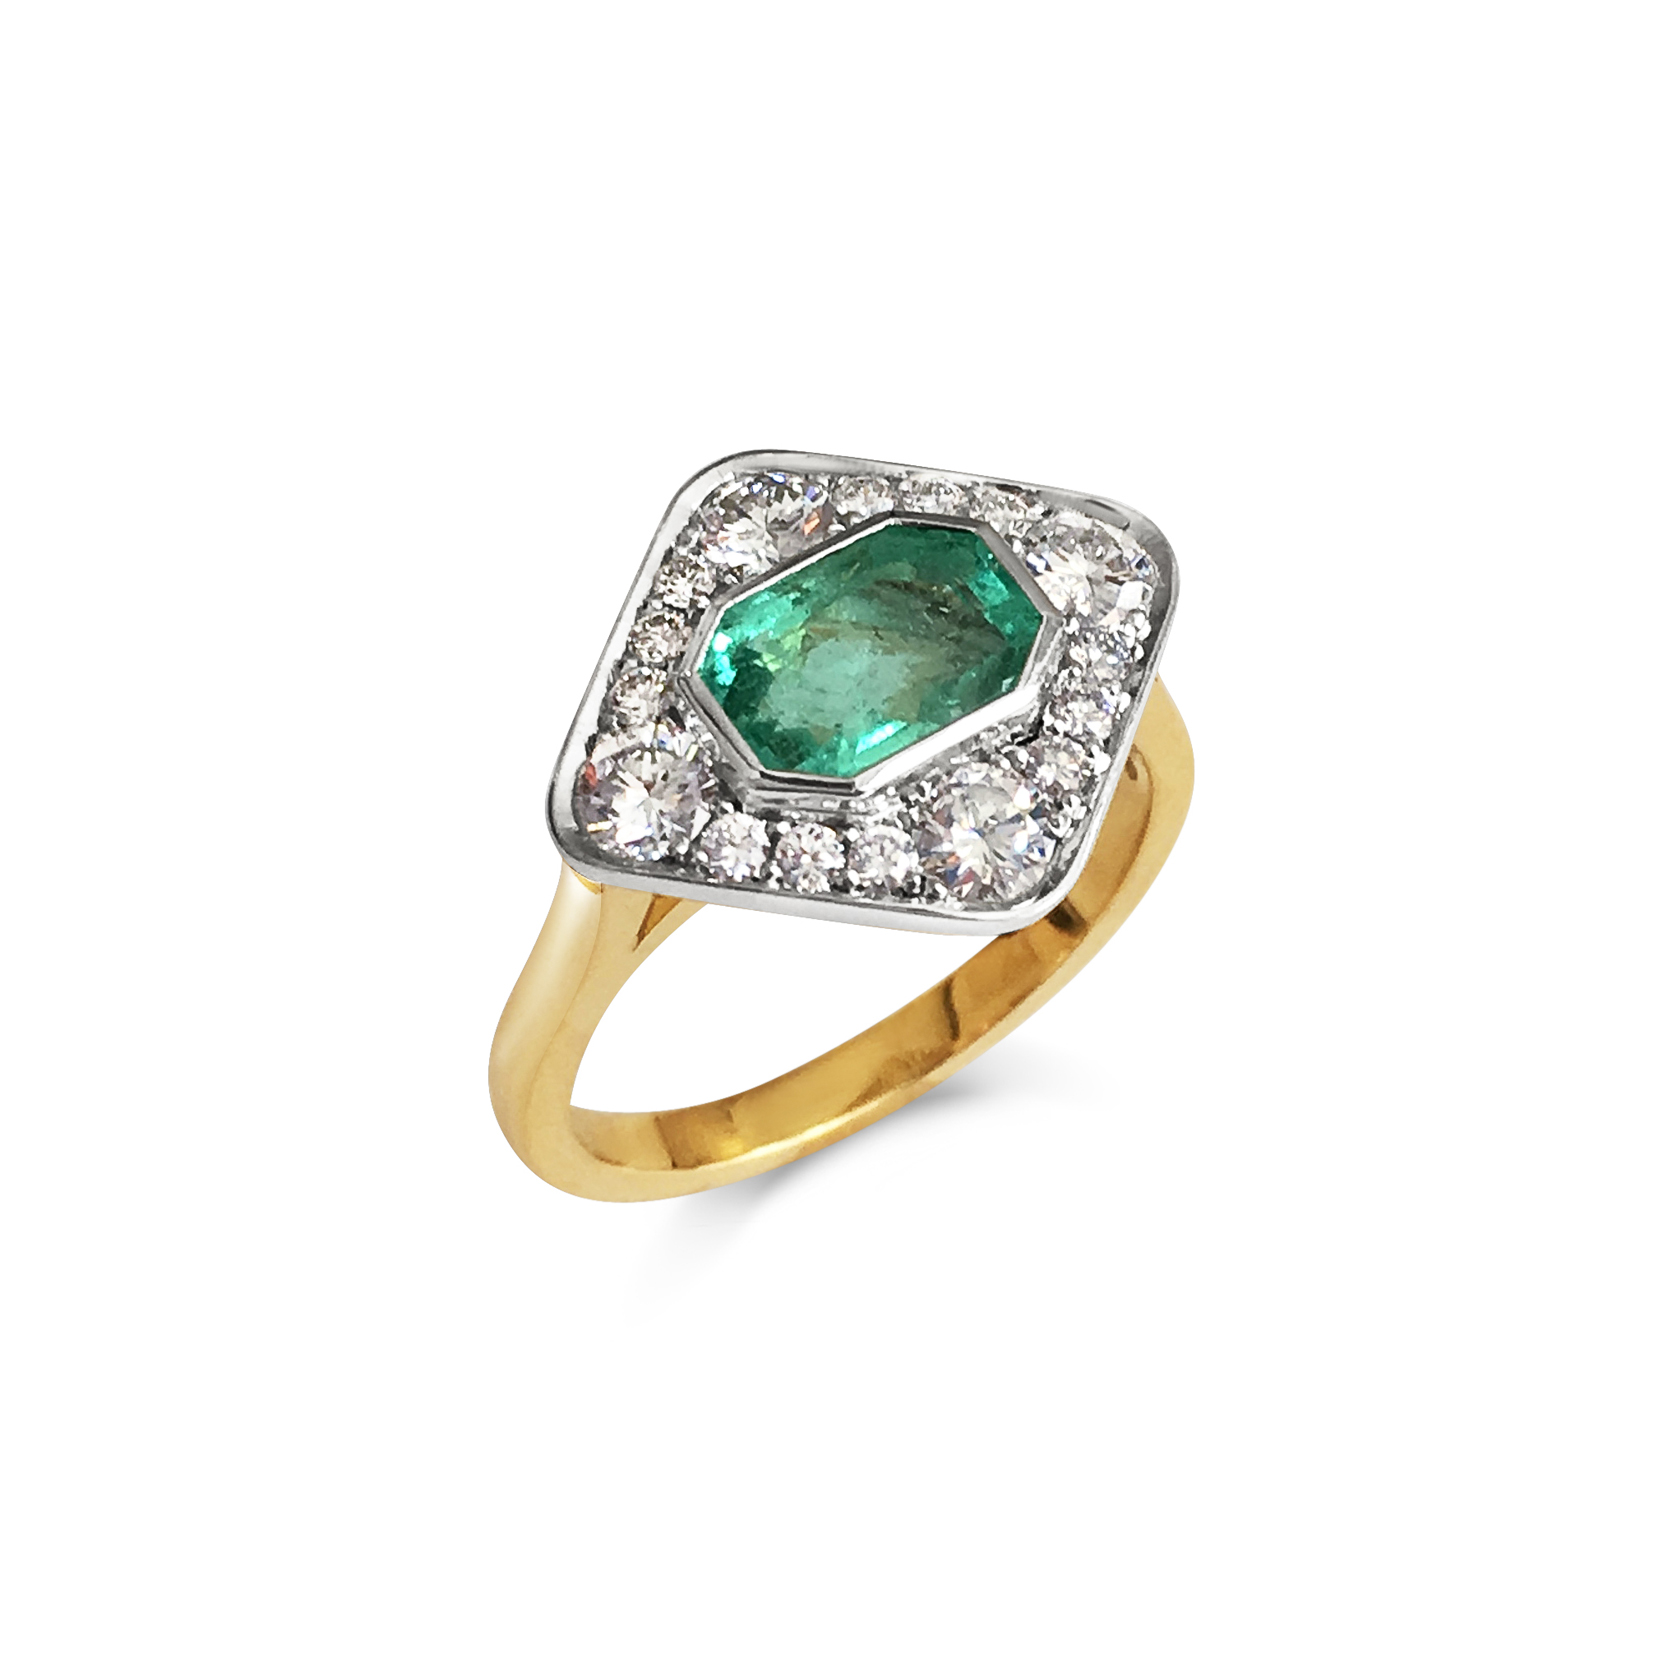 Emerald and diamond panel ring mounted in 18ct white and yellow gold